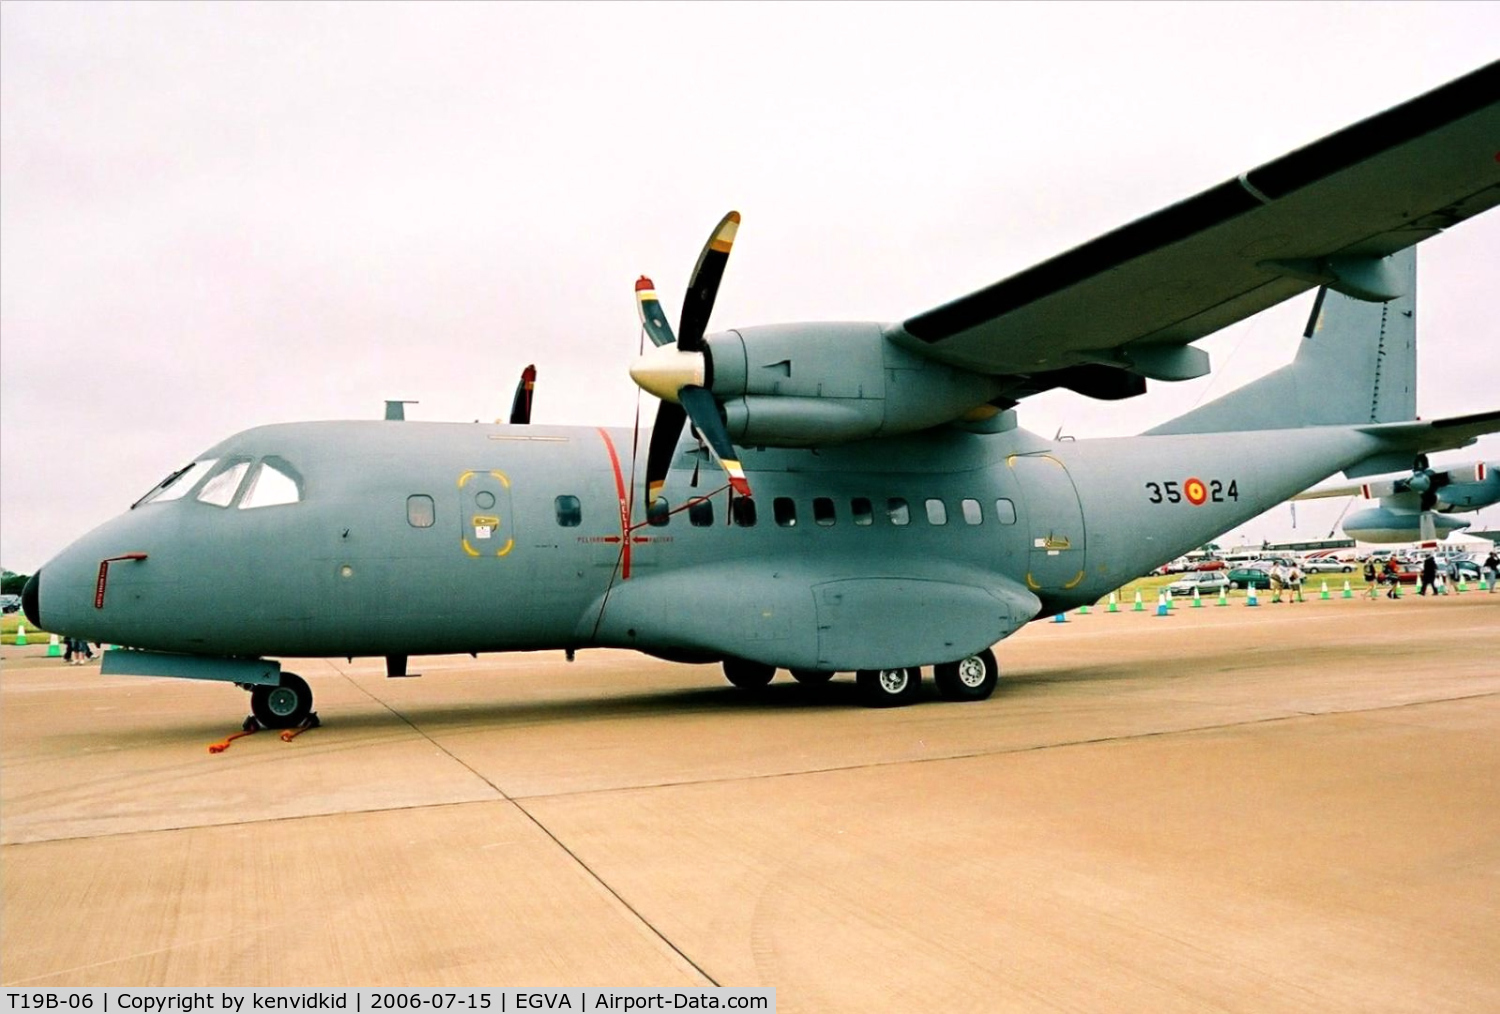 T19B-06, Airtech CN-235-100M C/N C037, Spanish Air Force on static display at RIAT.